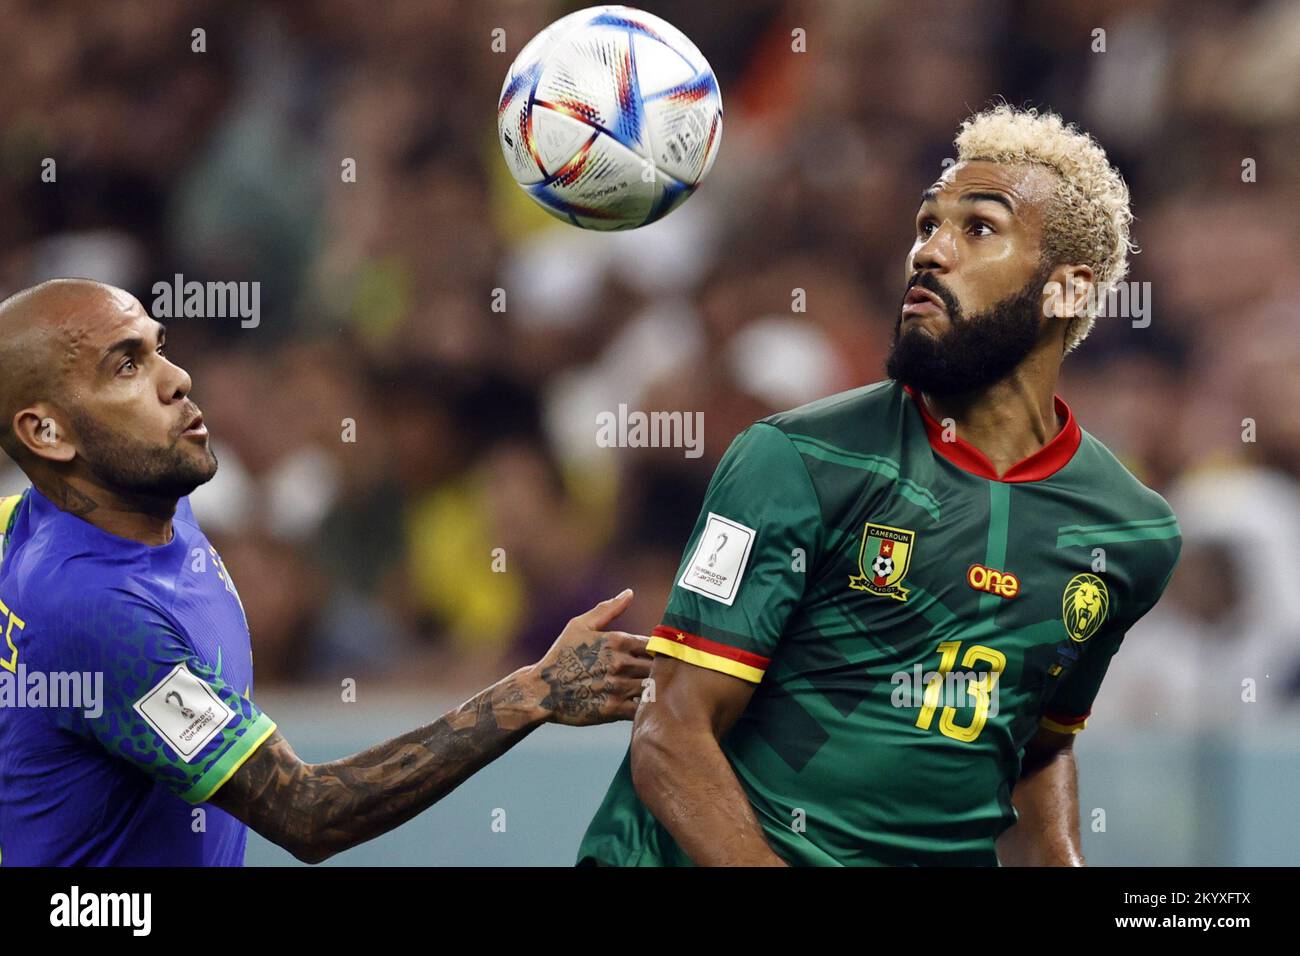 Qatar. 02nd Dec, 2022. LUSAIL CITY - (l-r) Dani Alves of Brazil, Eric Maxim Choupo-Moting of Cameroon during the FIFA World Cup Qatar 2022 group G match between Cameroon and Brazil at Lusail Stadium on December 2, 2022 in Lusail City, Qatar. AP | Dutch Height | MAURICE OF STONE Credit: ANP/Alamy Live News Stock Photo